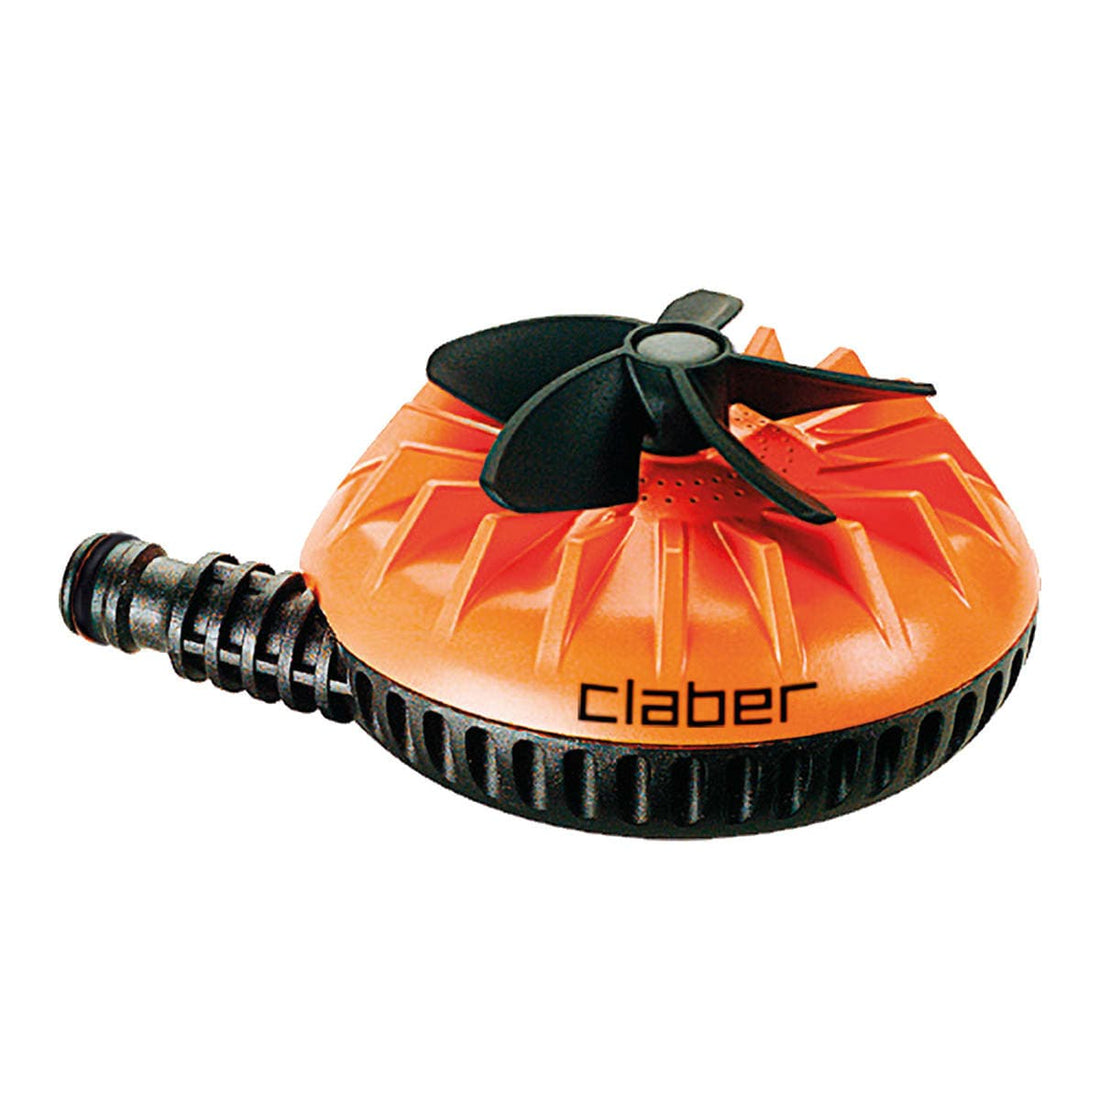 CLABER ROTARY ROLL SPRAYER FOR SURFACE IRRIGATION - best price from Maltashopper.com BR500442009